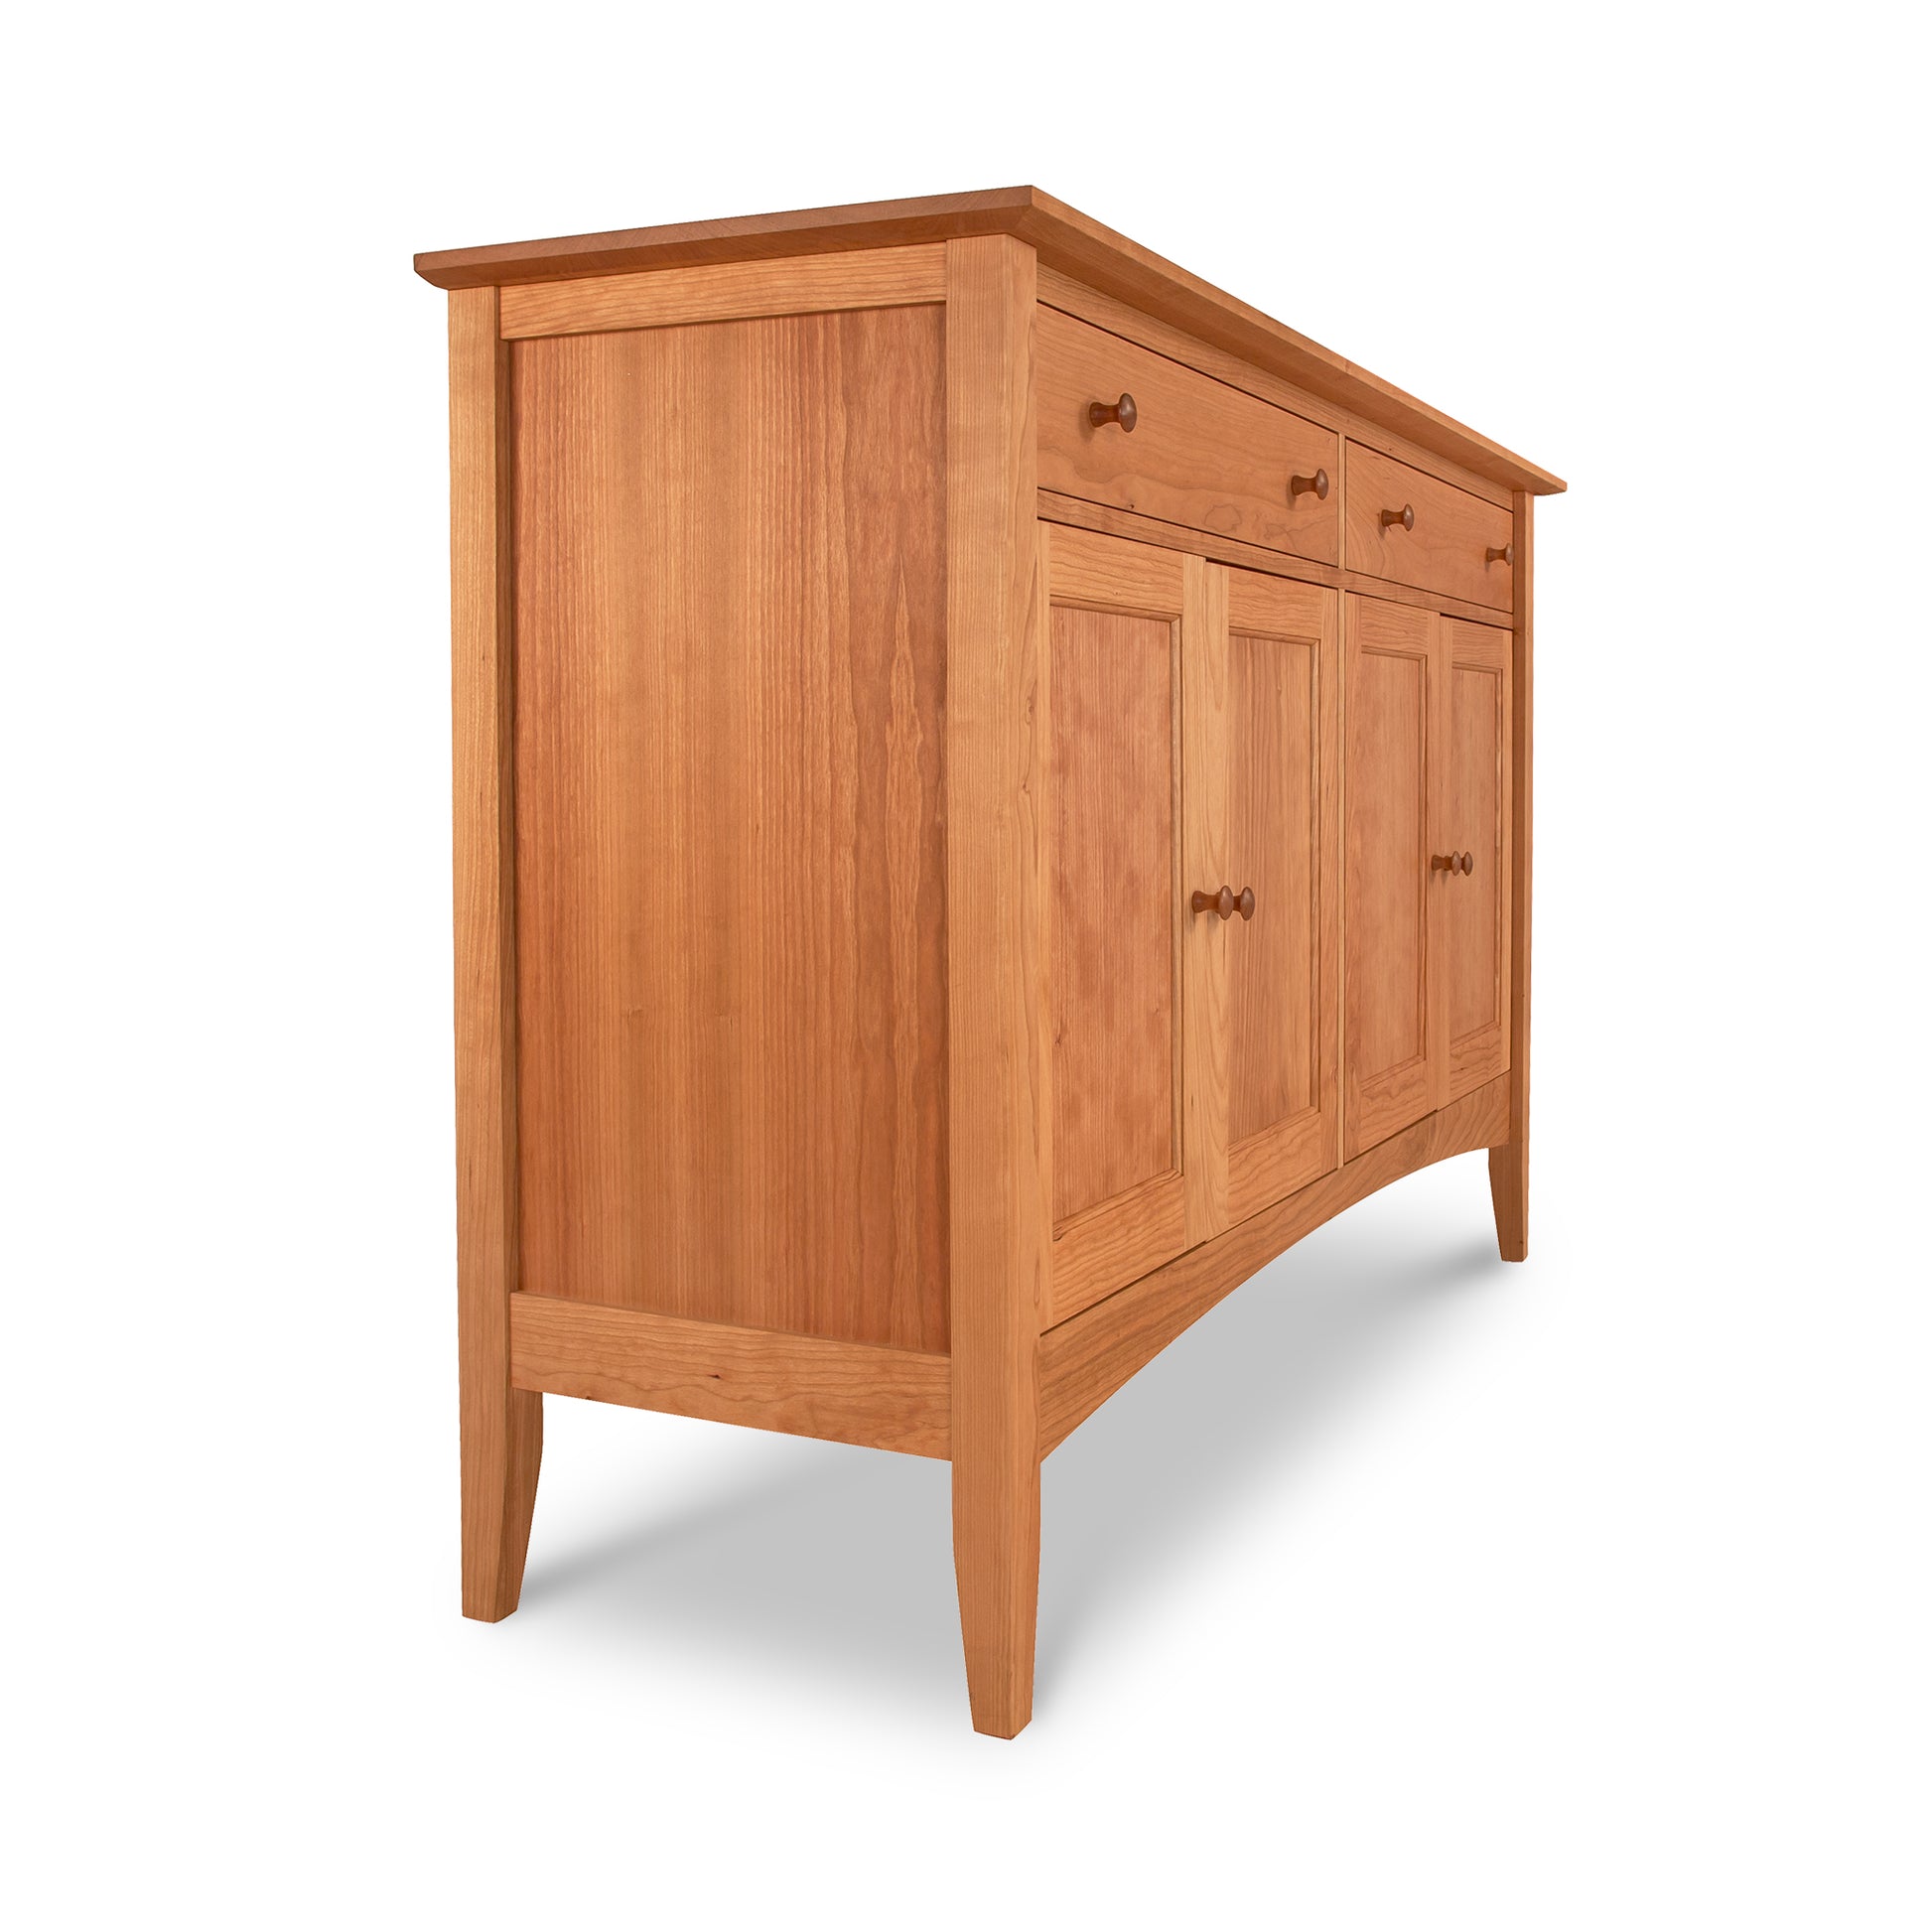 Elegant Maple Corner Woodworks American Shaker Sideboard featuring three drawers and two cabinet doors, set against a white background.